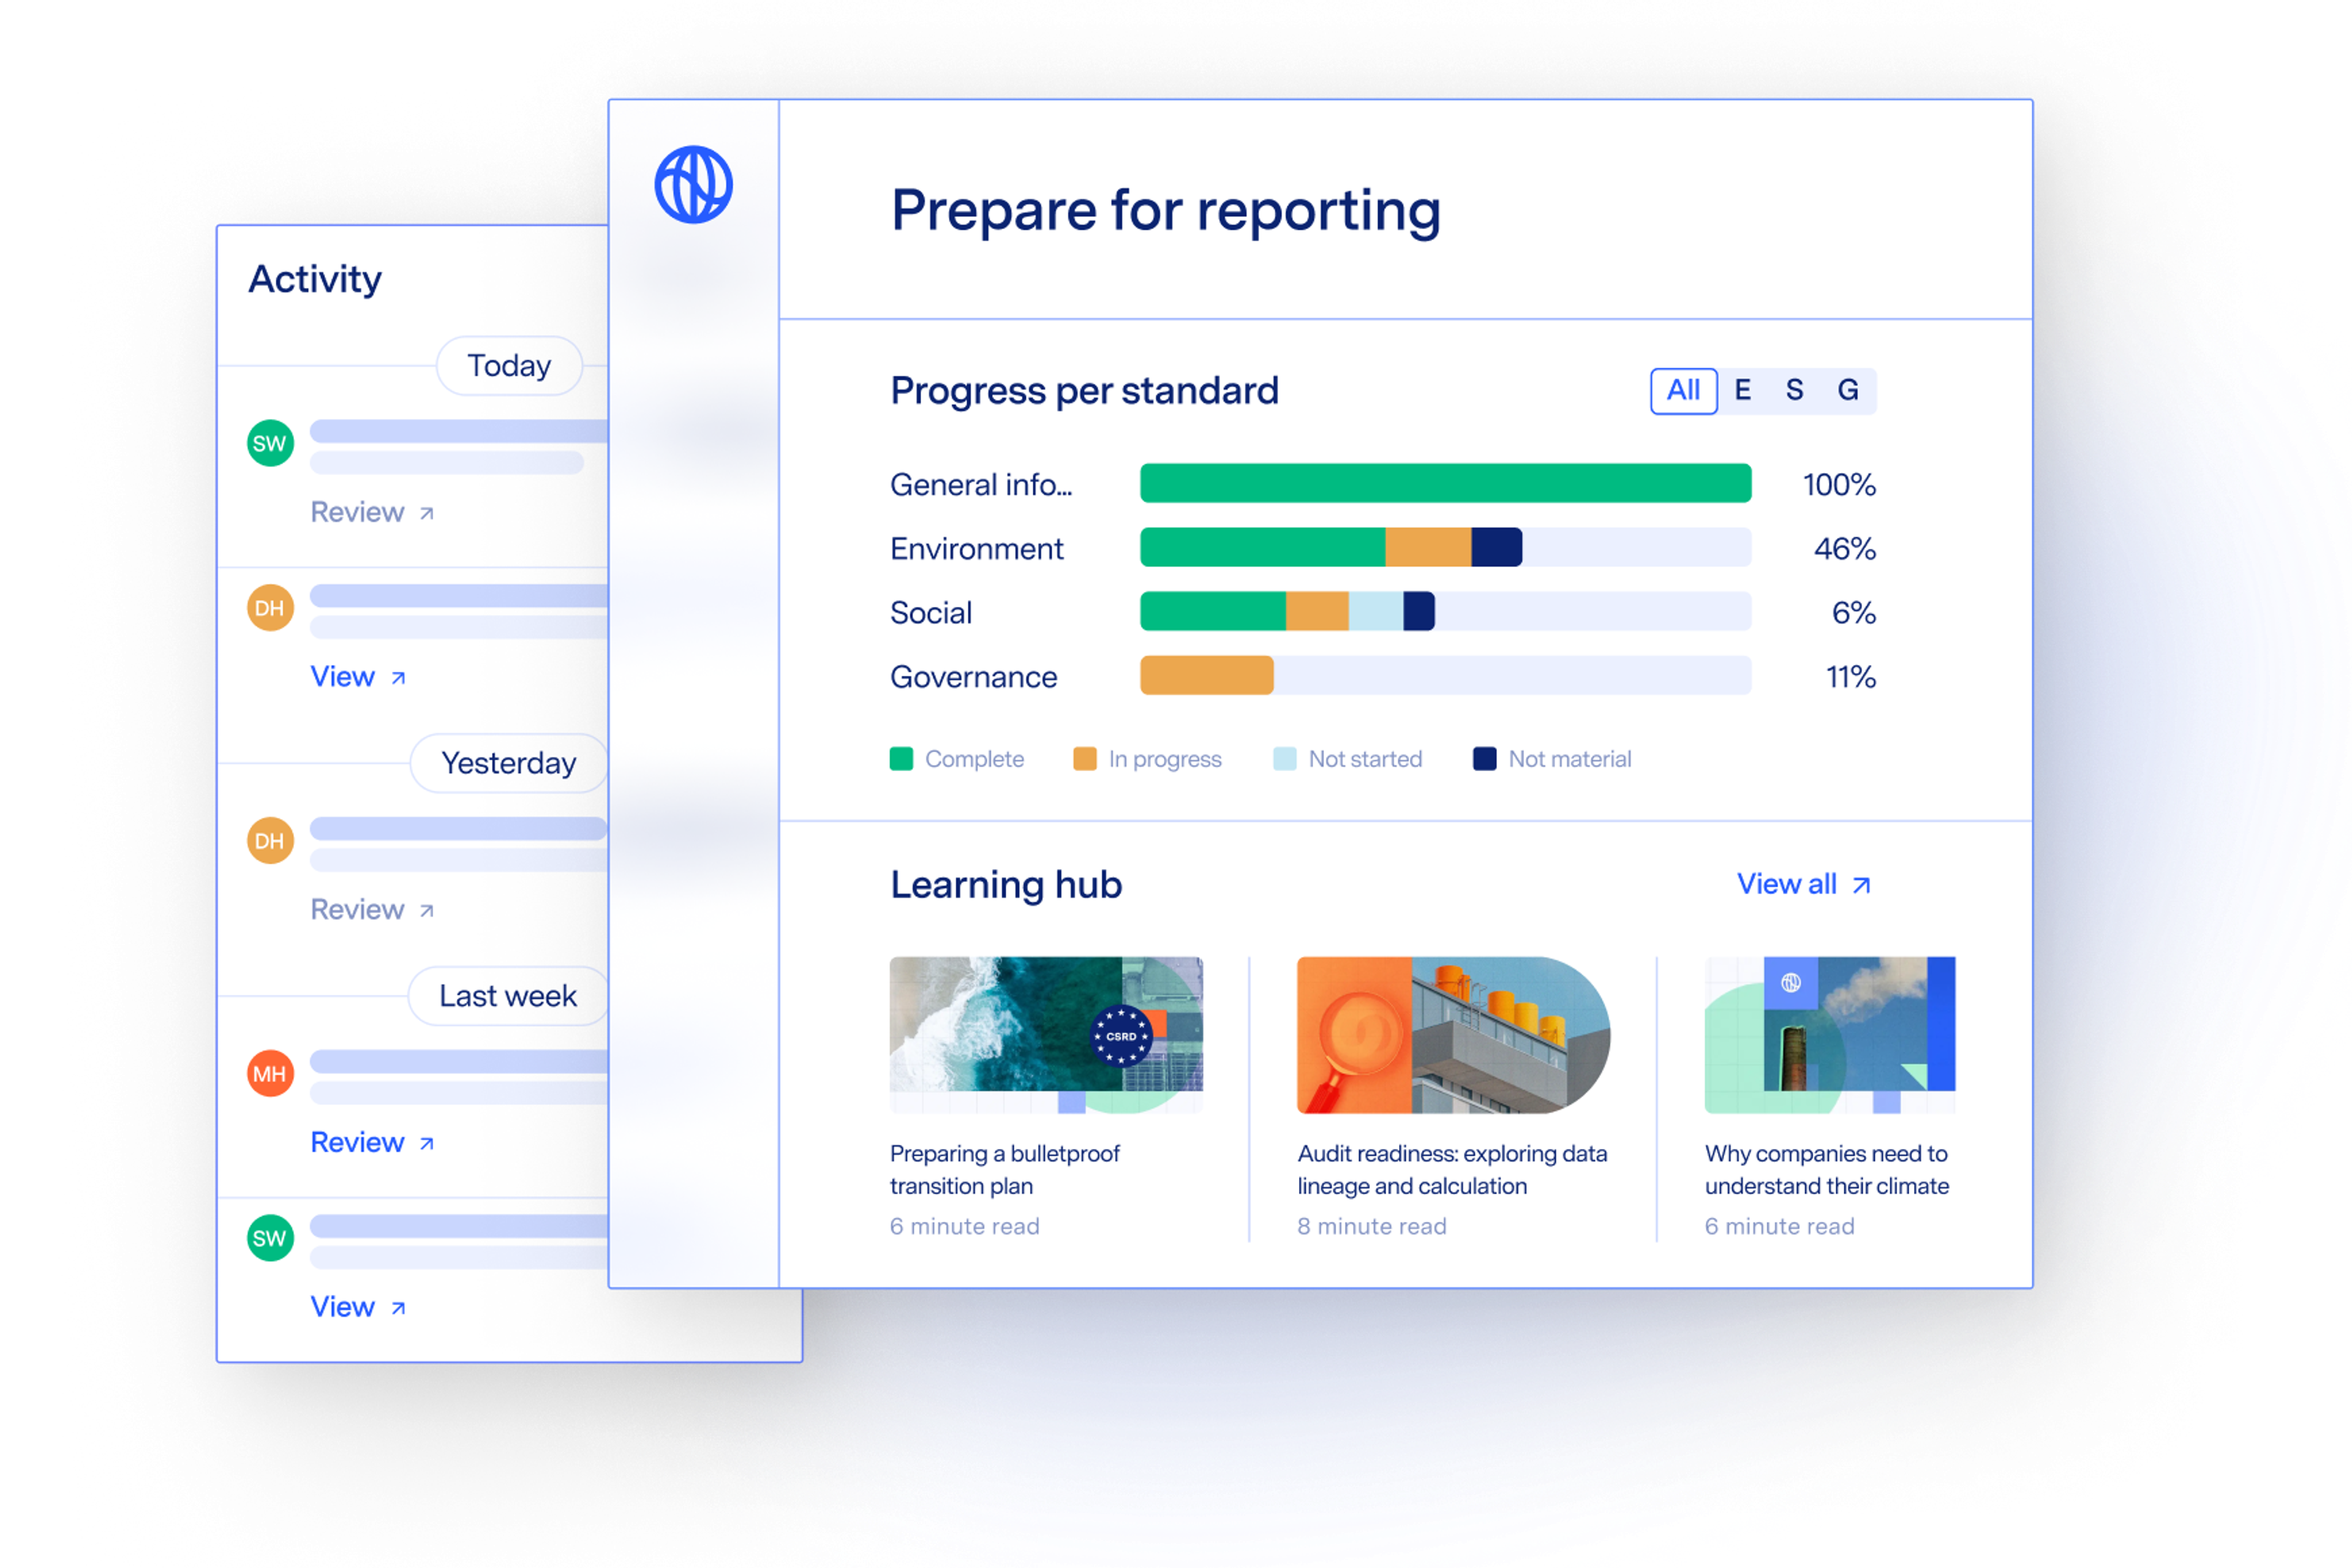 Watershed helps companies prepare for CSRD reporting